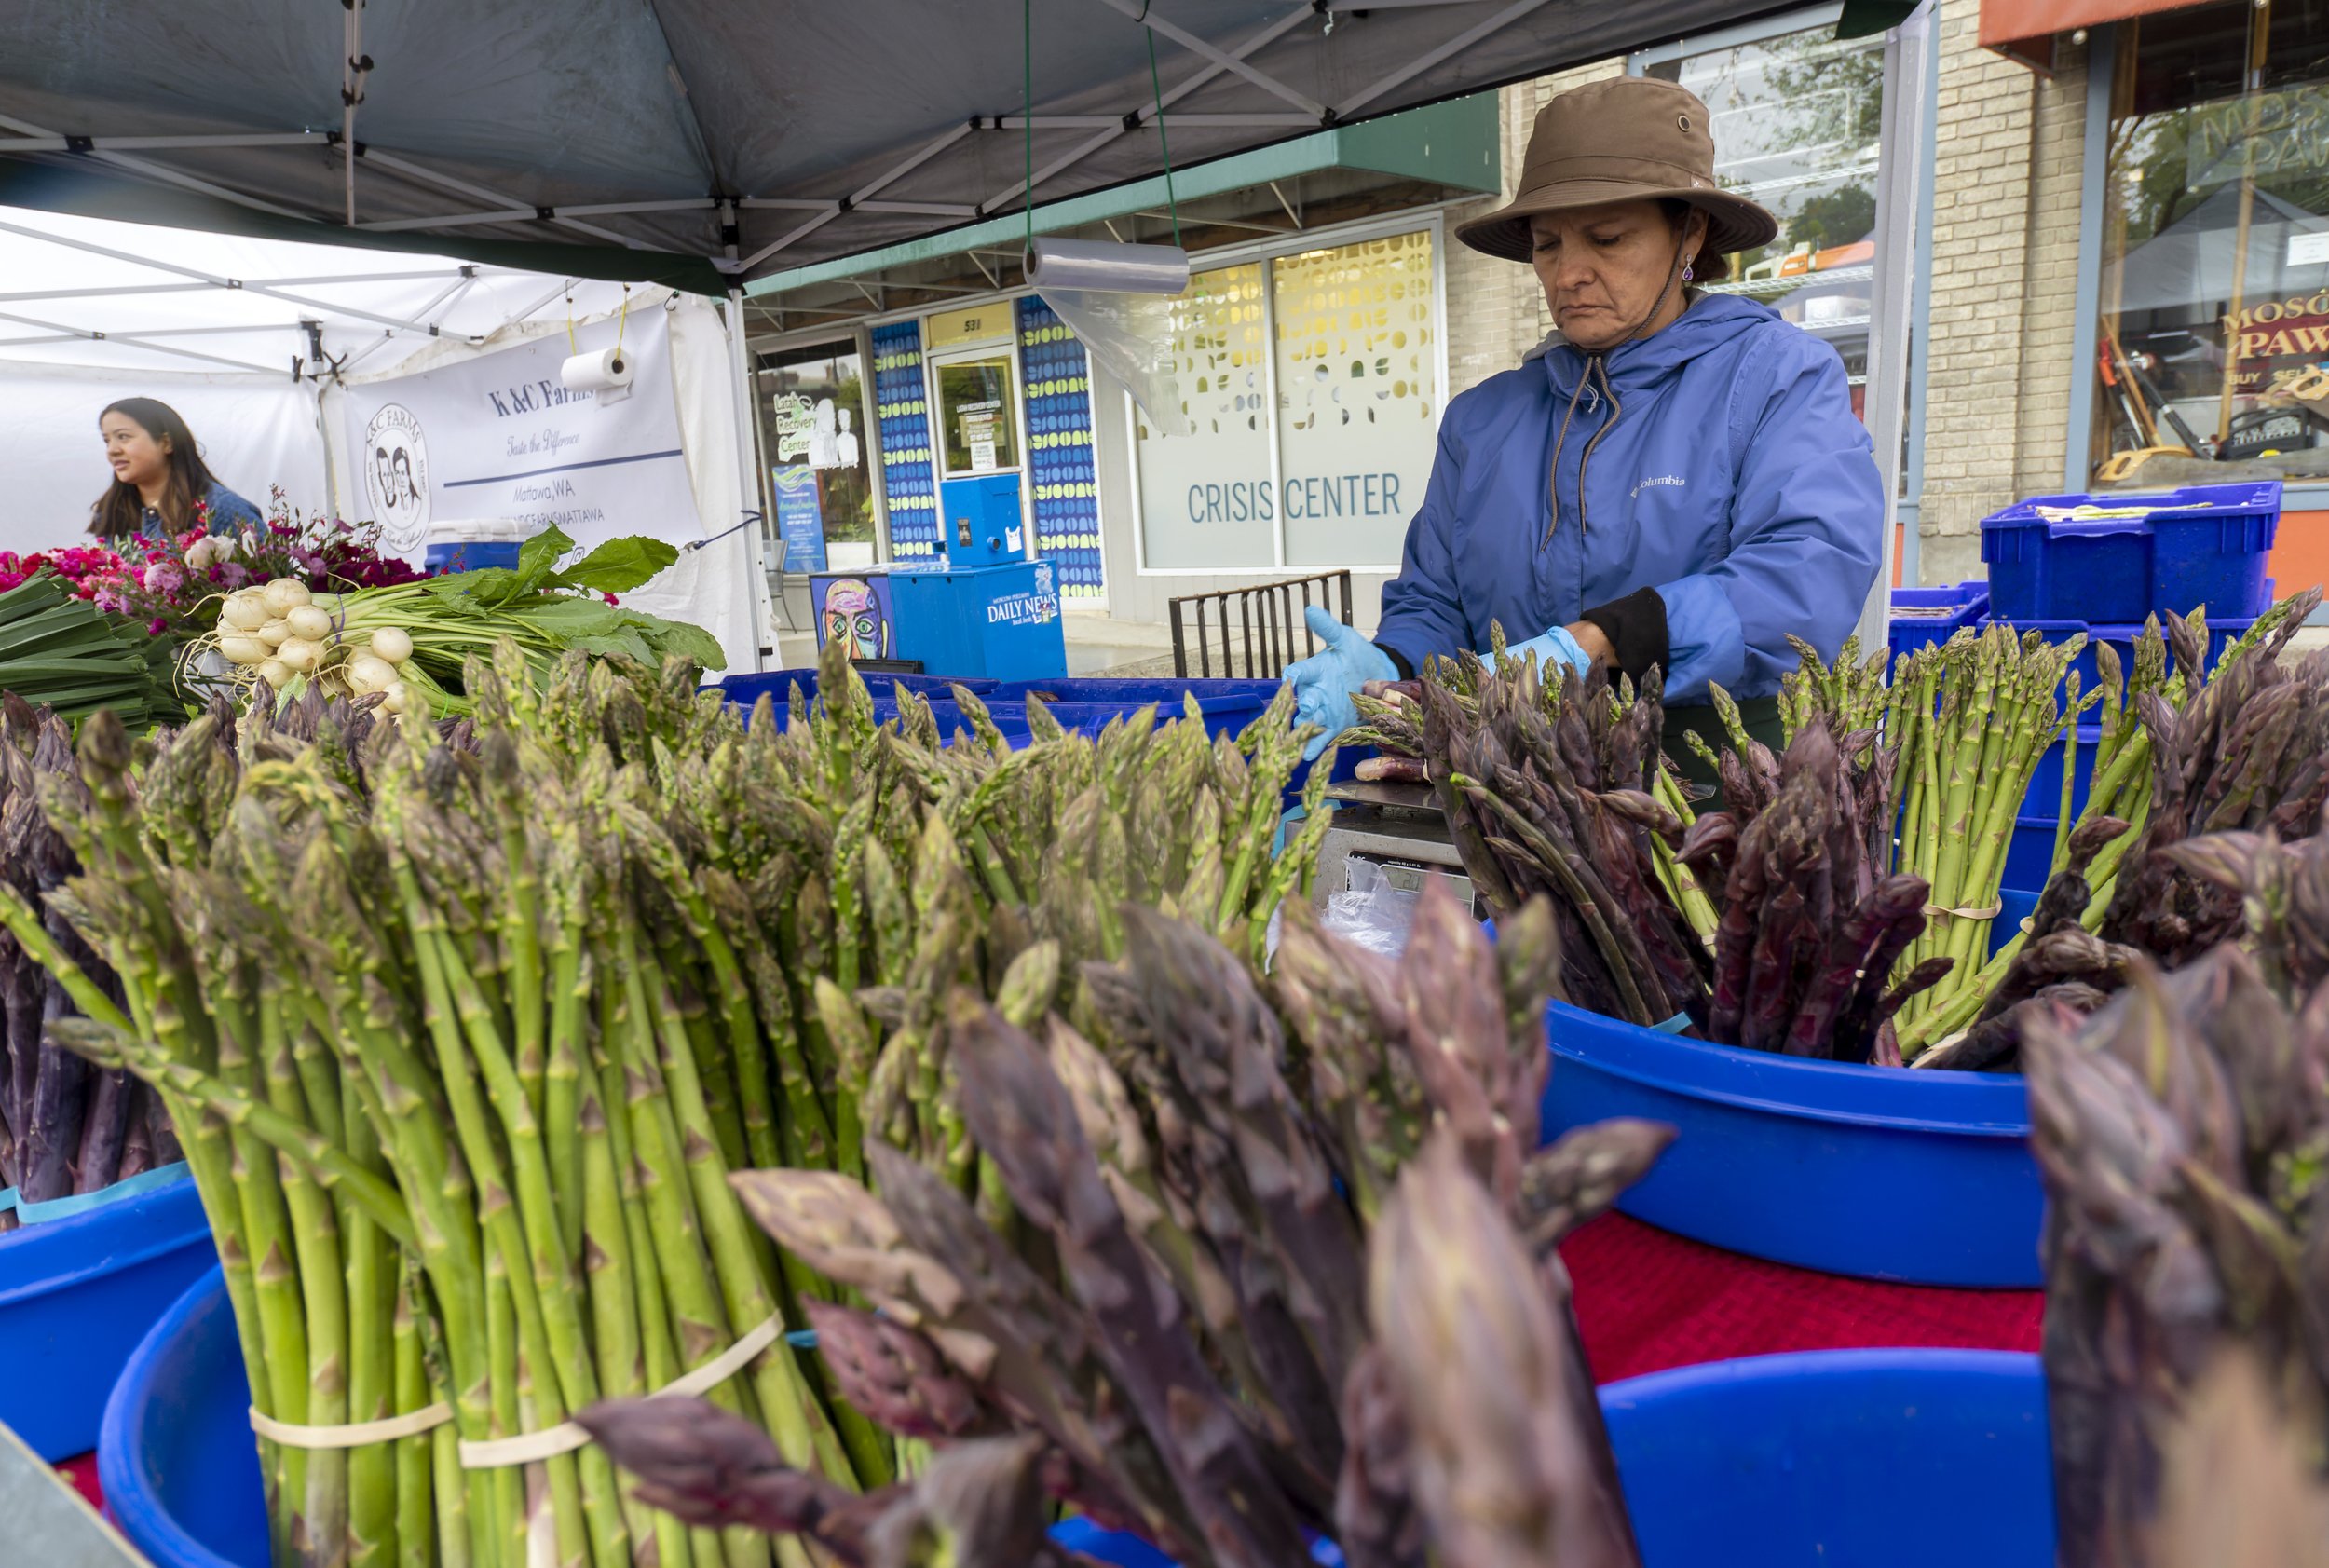 A woman sells asparagus at the Moscow Farmers Market